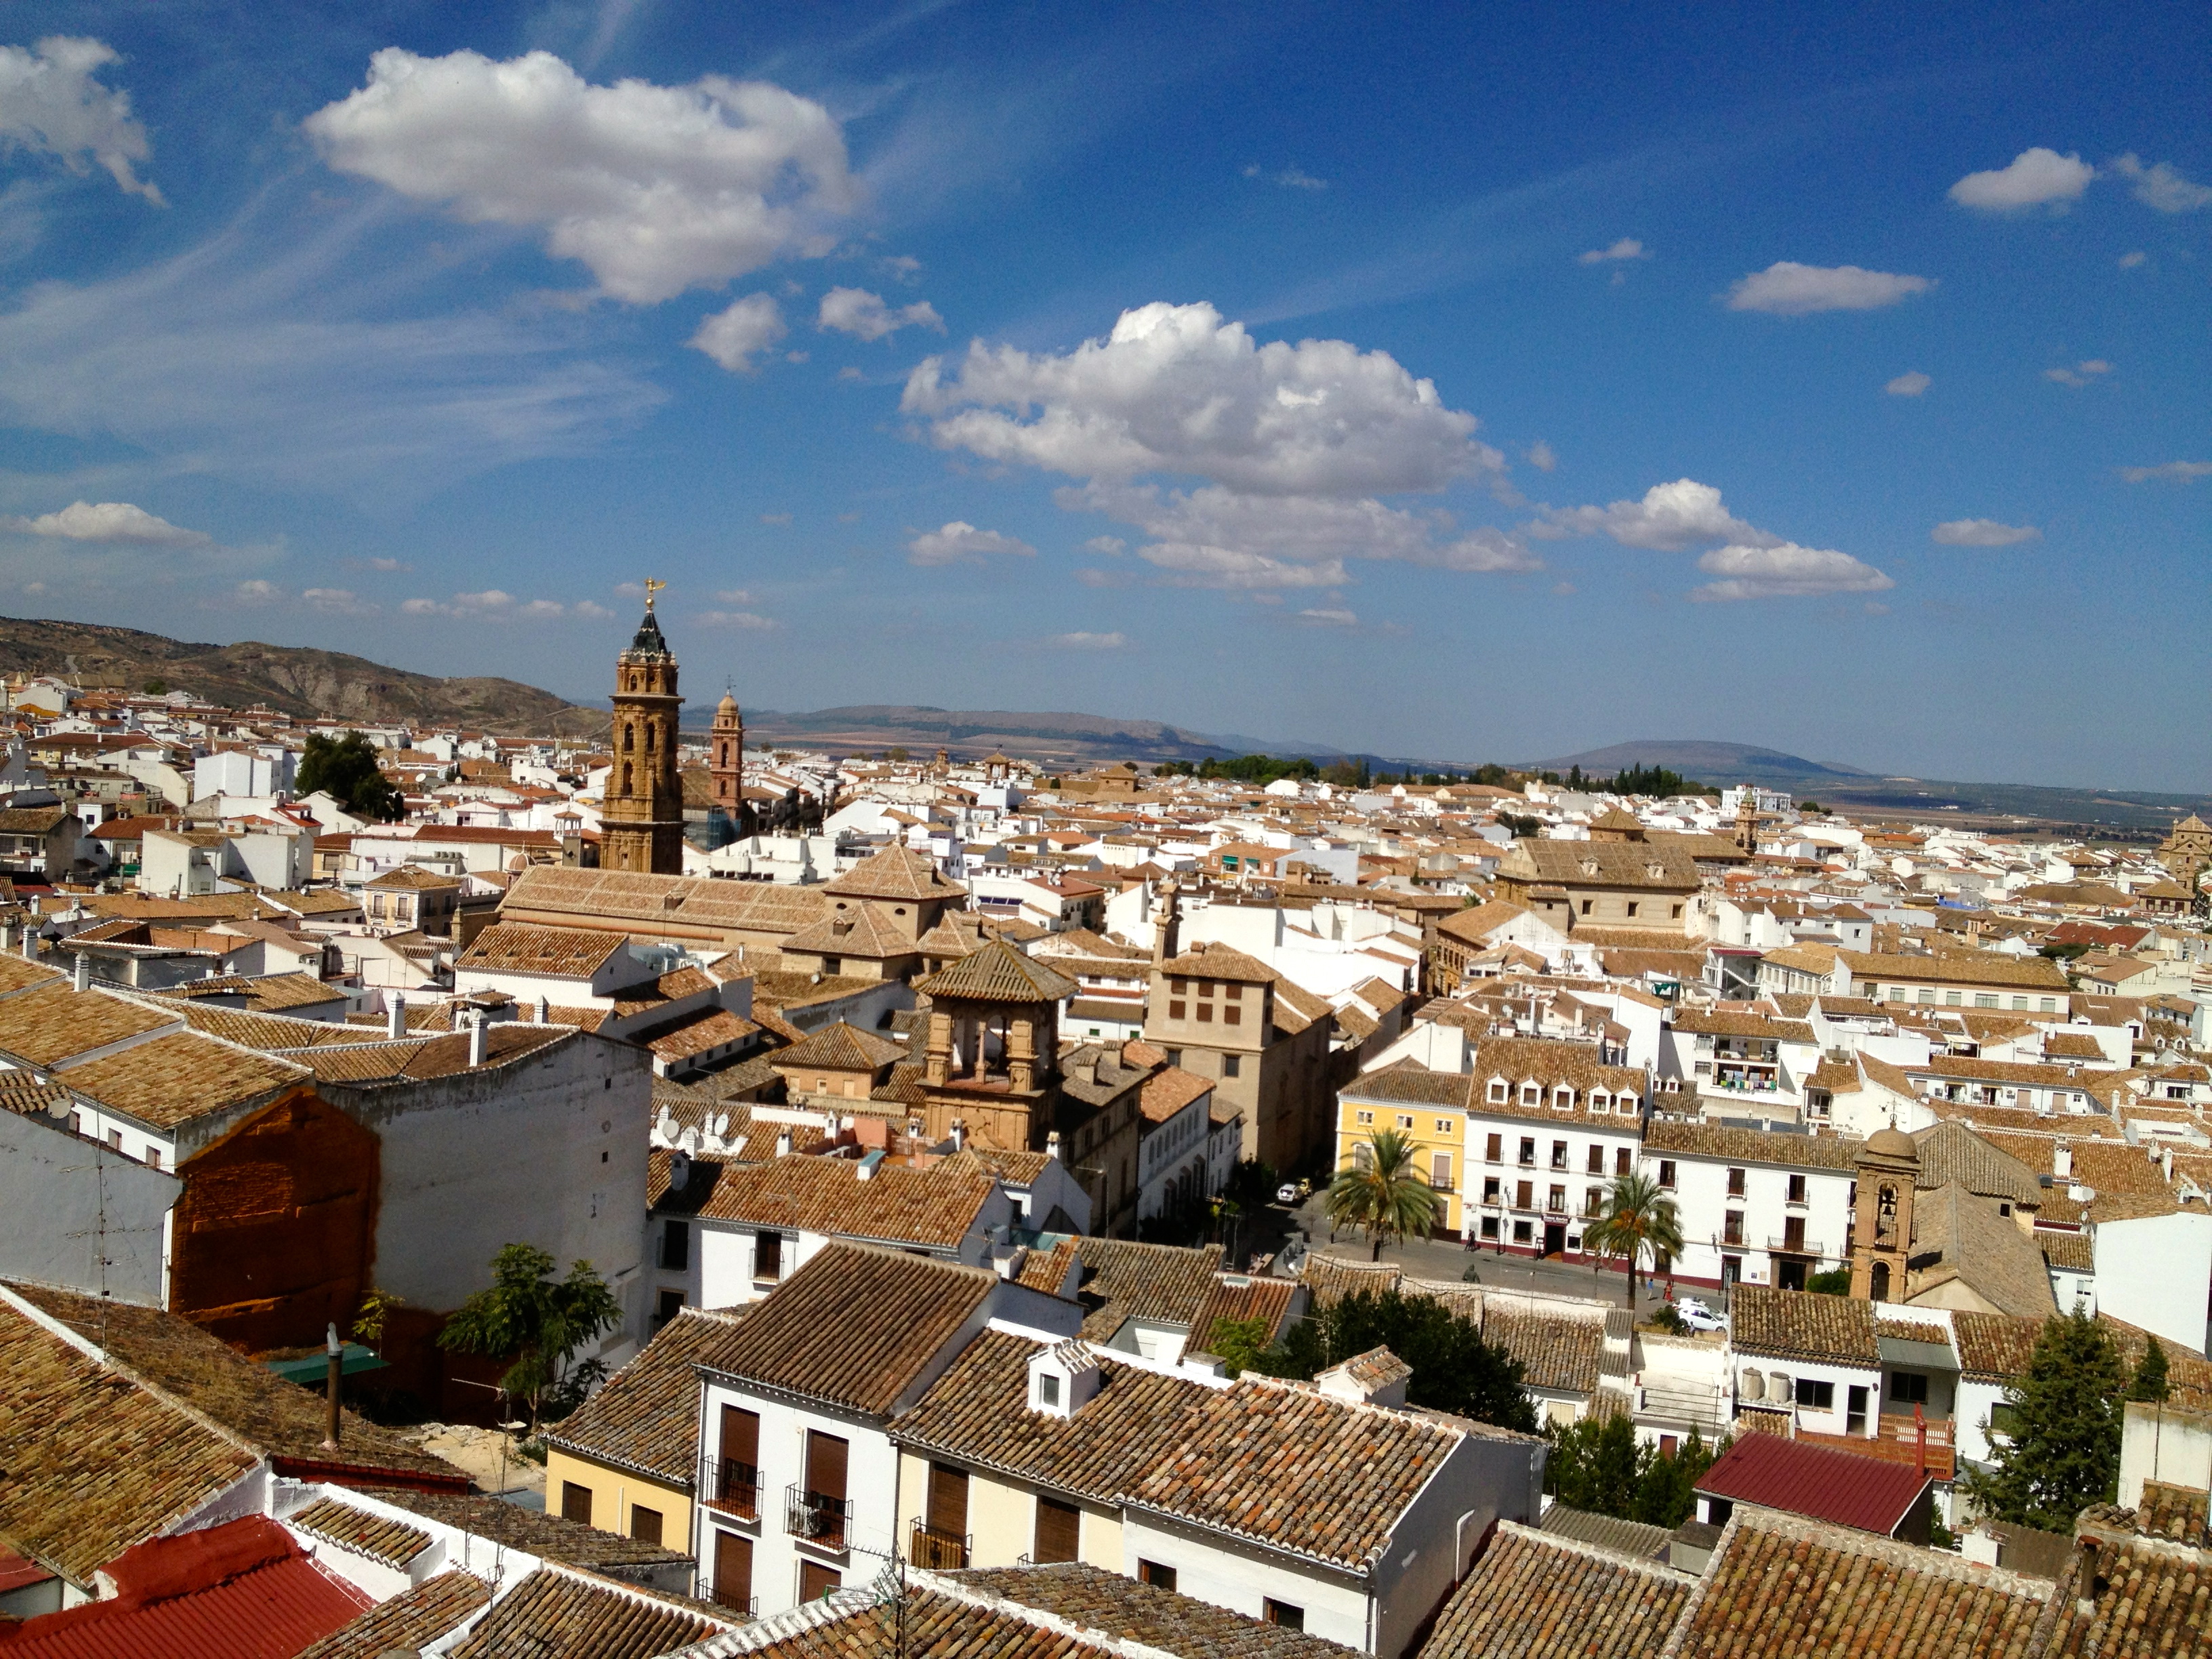 Reflecting On Two Years of Expat Life In Spain - She Dreams of Travel